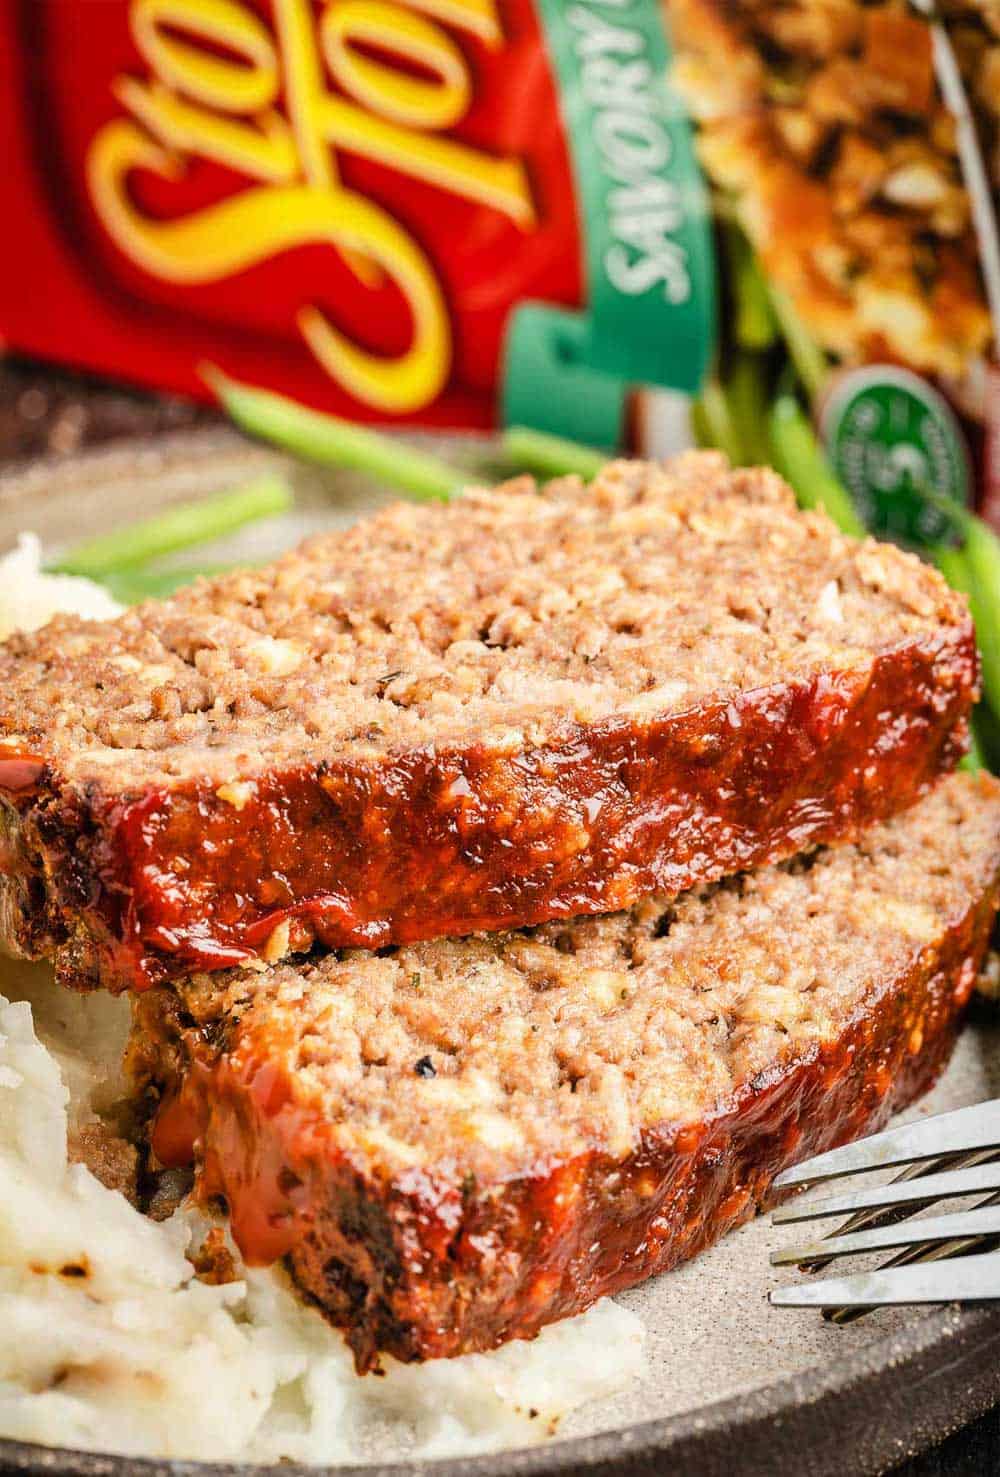 The photo shows two slices of meatloaf made with Stove Top stuffing mix, served on a plate alongside mashed potatoes and green beans. In the background, there is a box of Stove Top stuffing mix. The meatloaf appears moist and flavorful with a golden-brown crust.